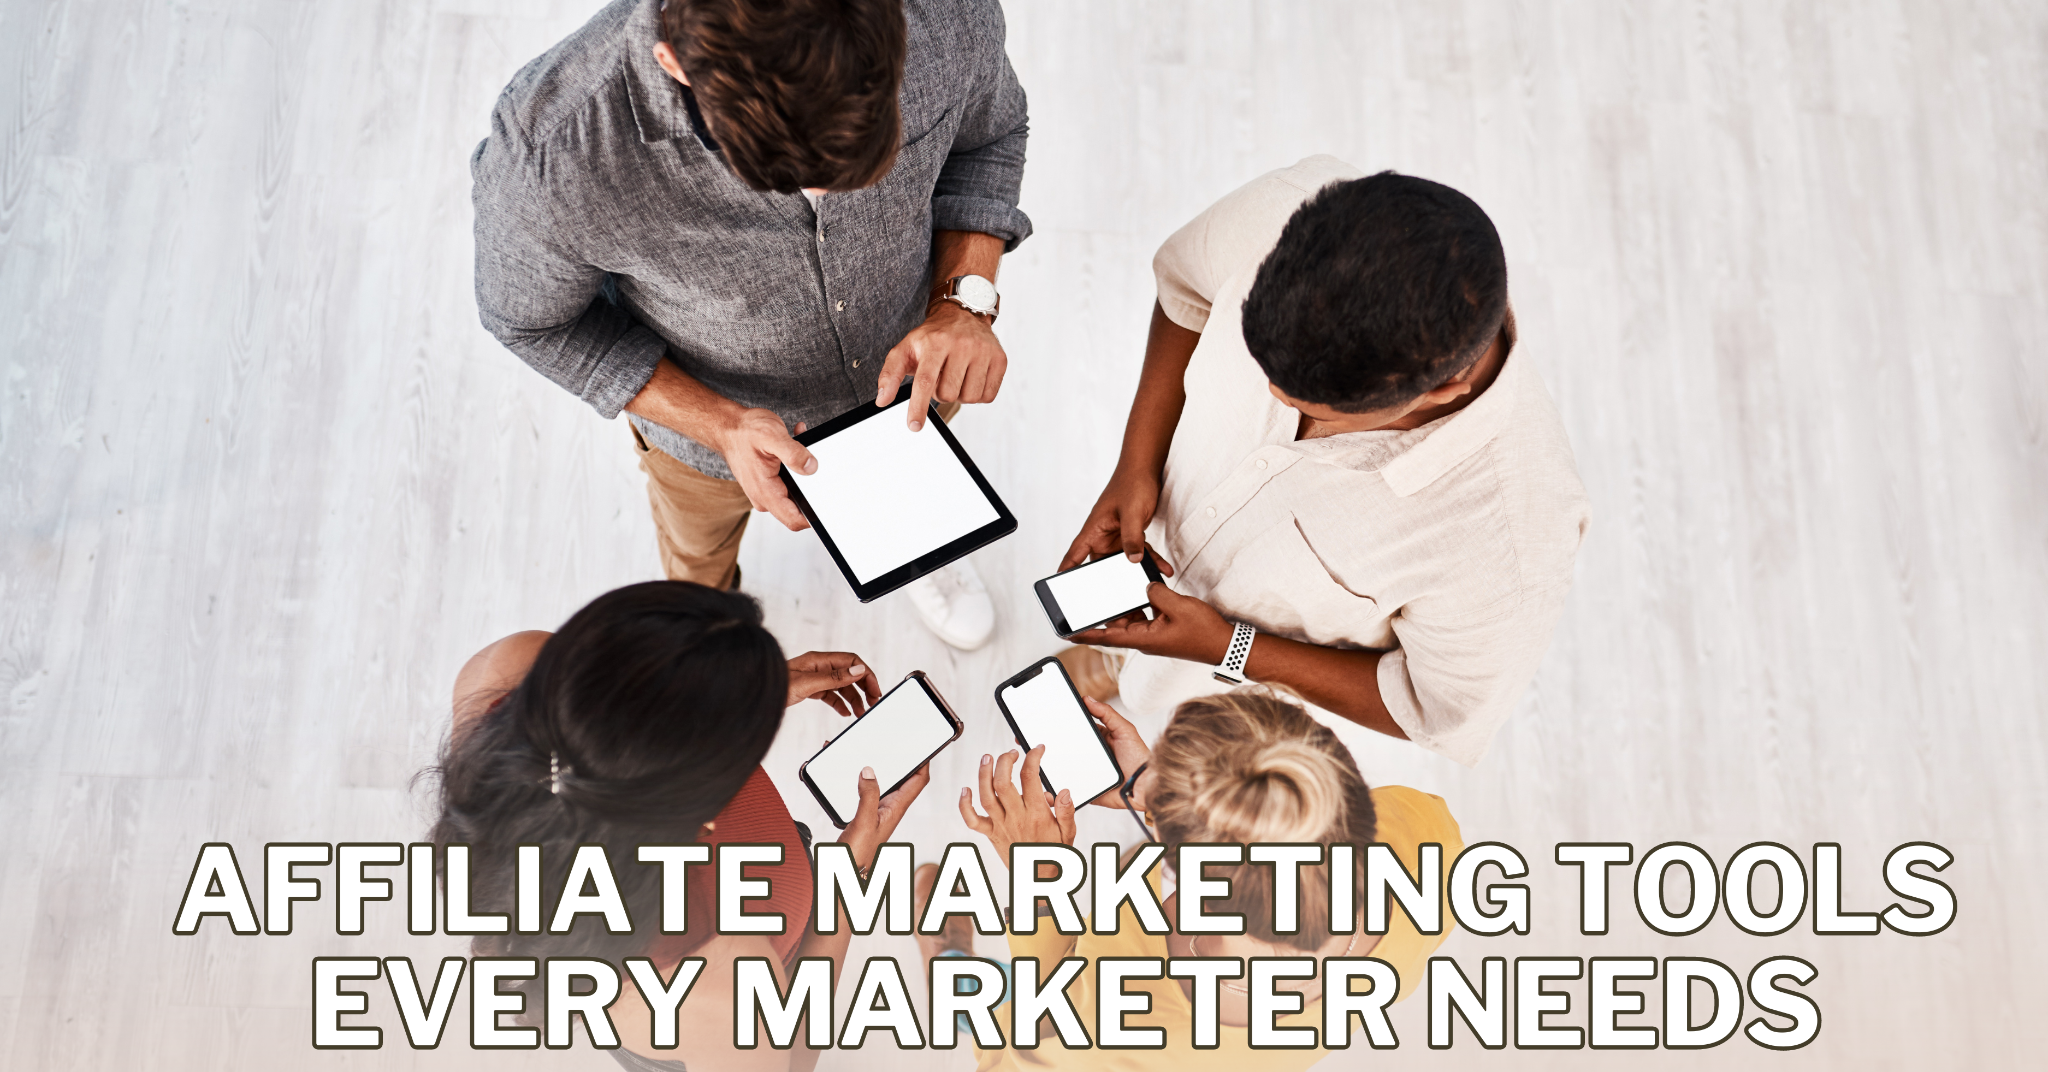 Best Affiliate Marketing Tools Every Marketer Needs